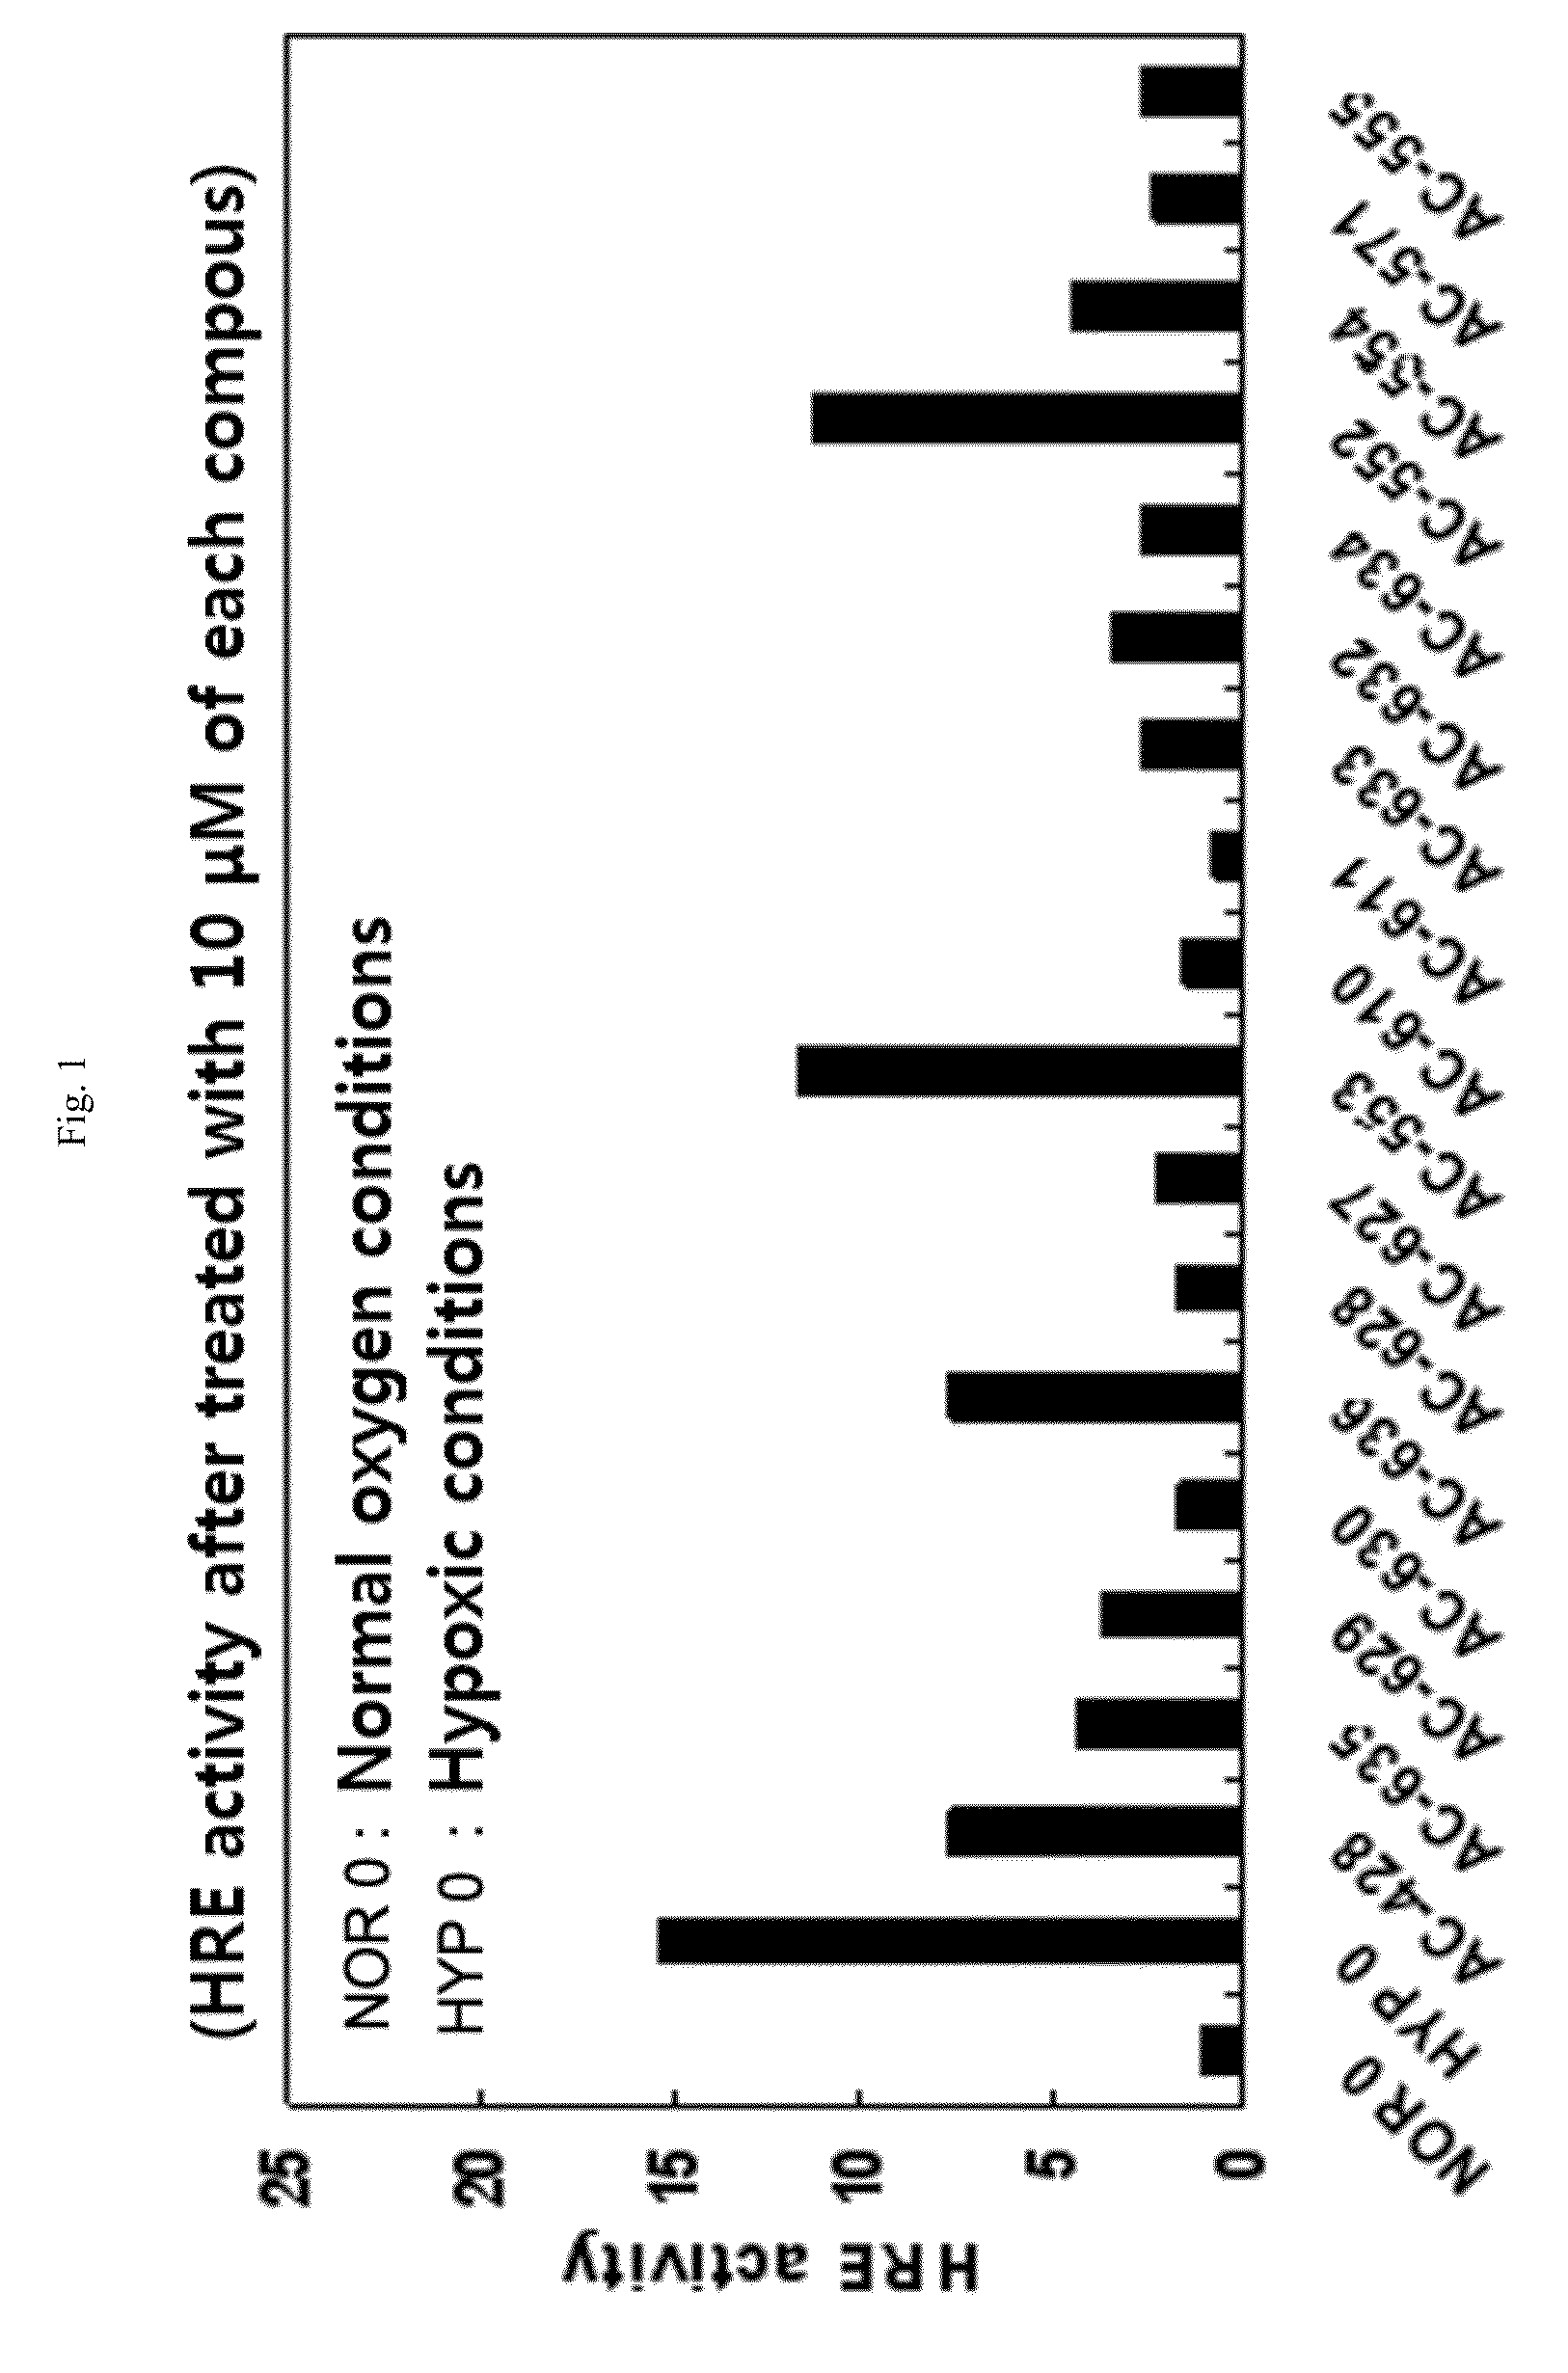 Aryloxy phenoxy acrylic compound having HIF-1 inhibition activity, method for preparing same, and pharmaceutical composition containing same as an active ingredient